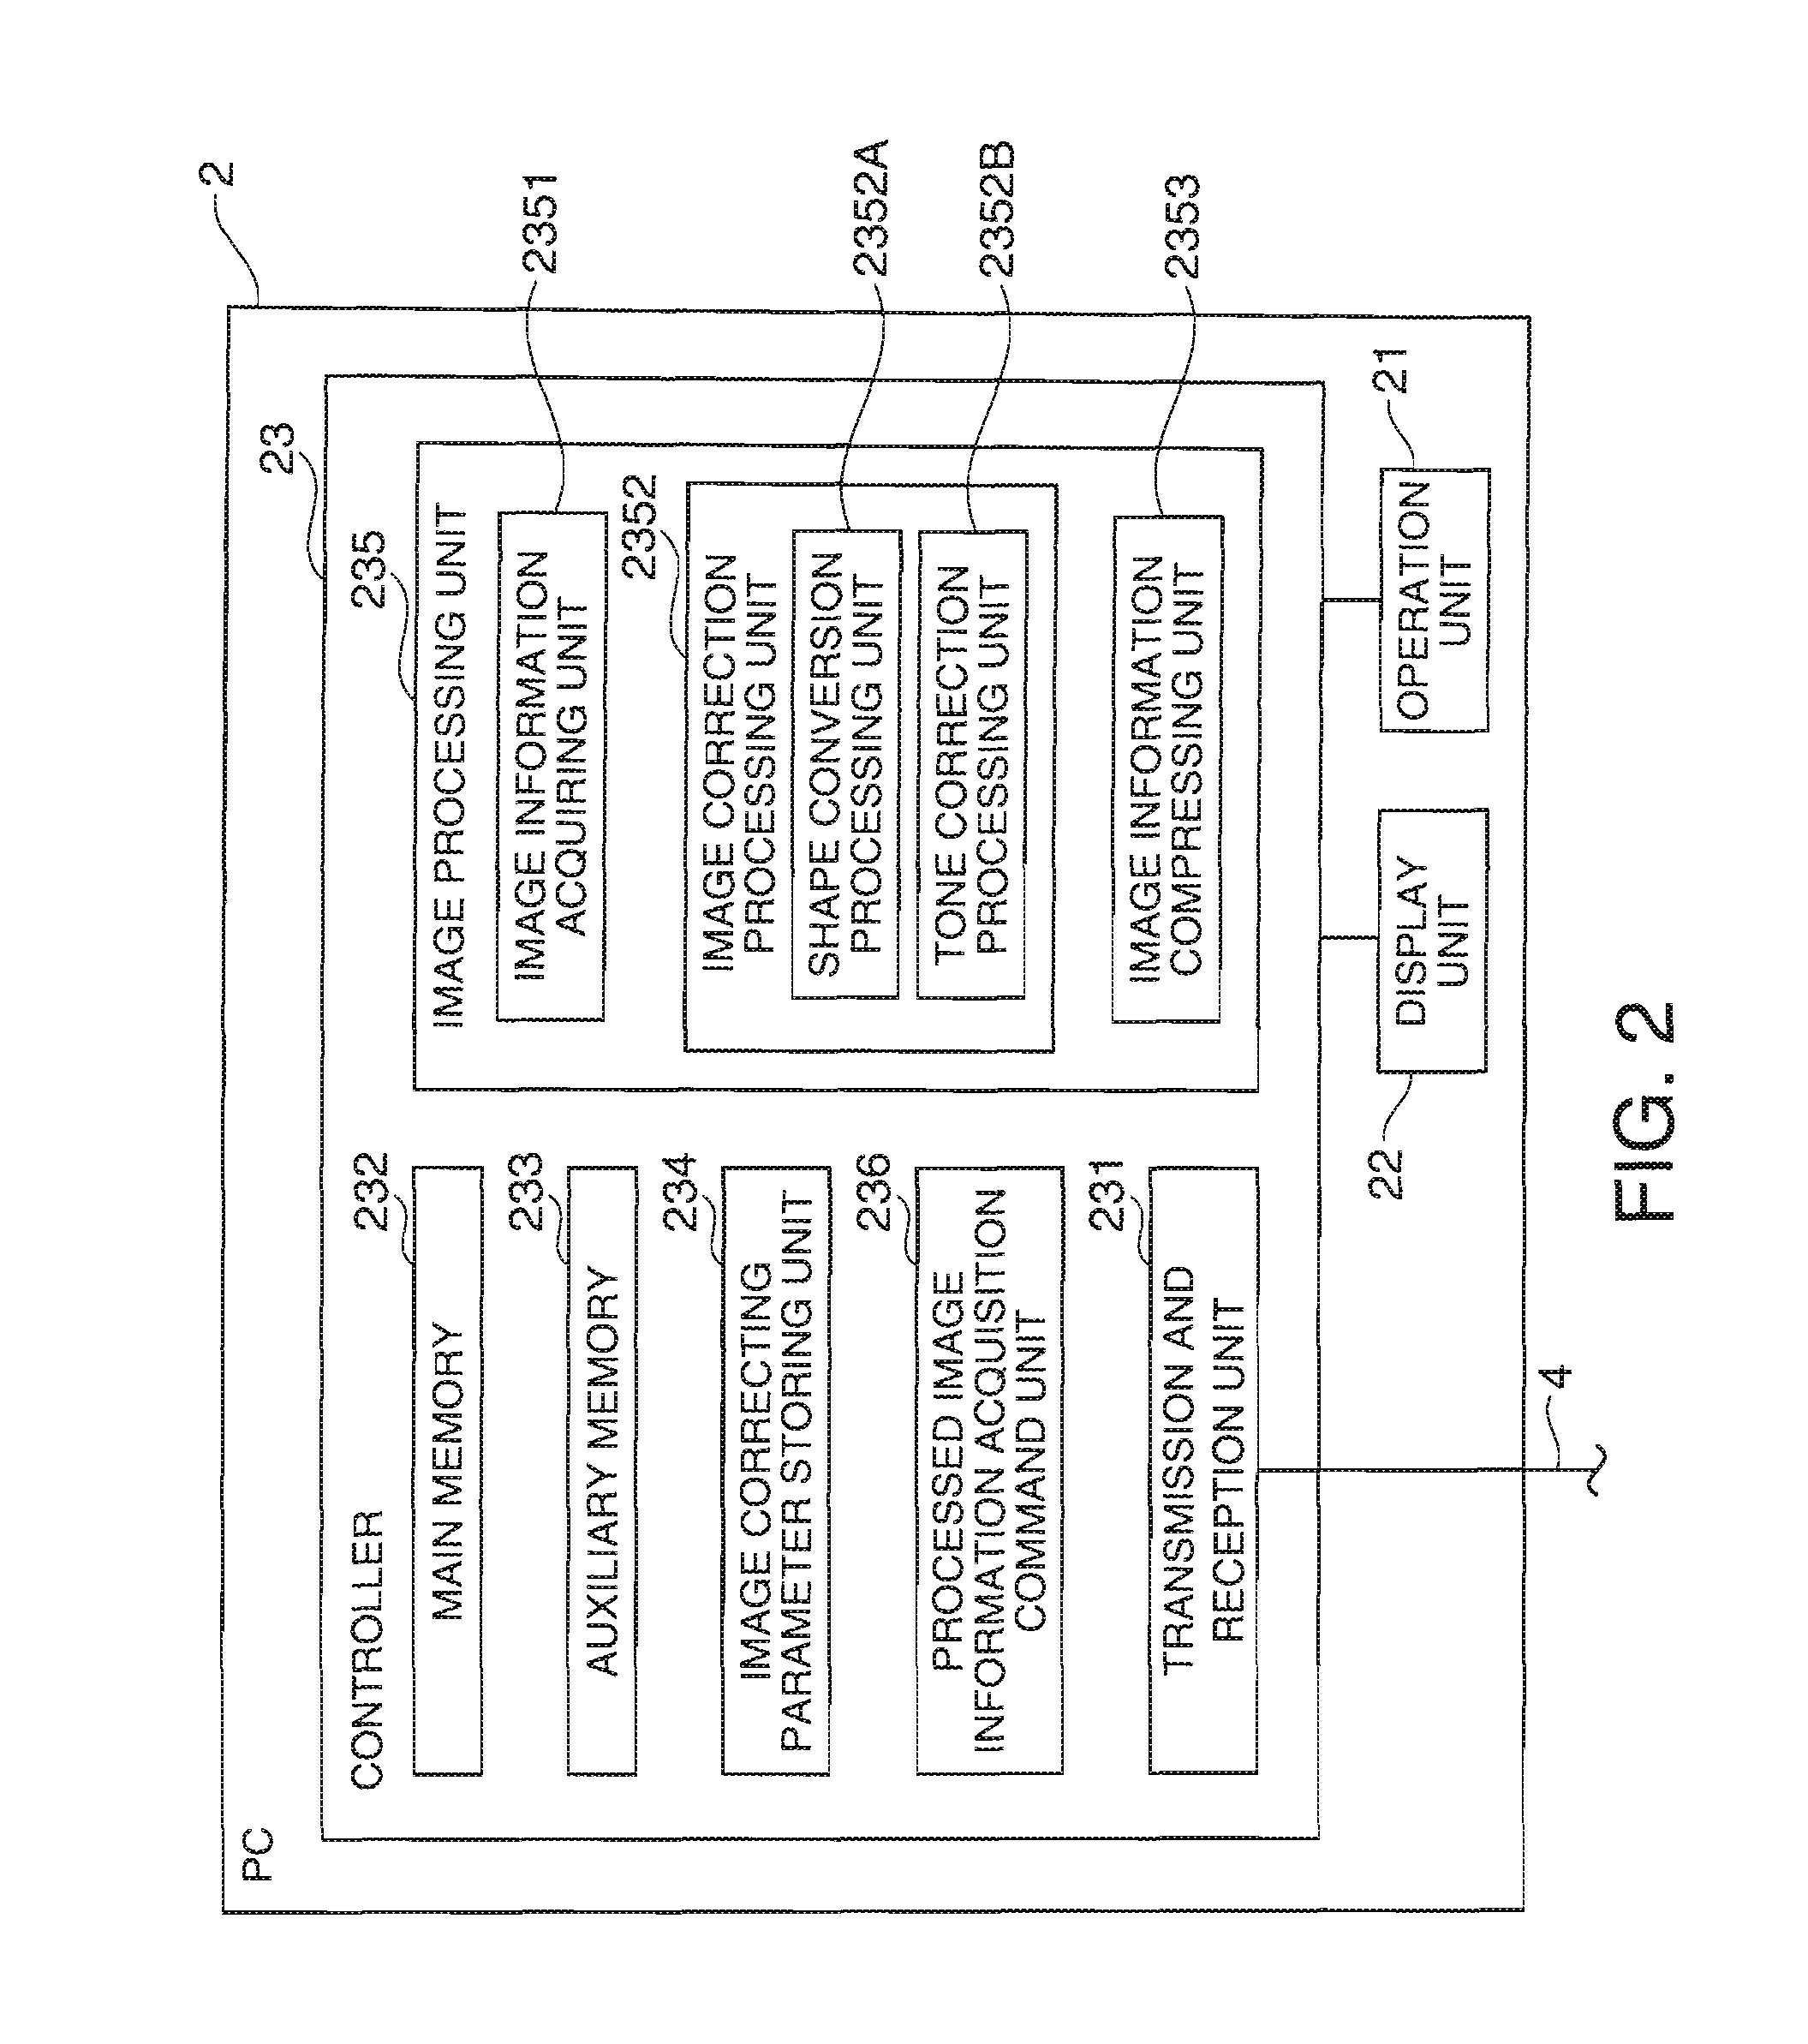 Image display system and image display apparatus